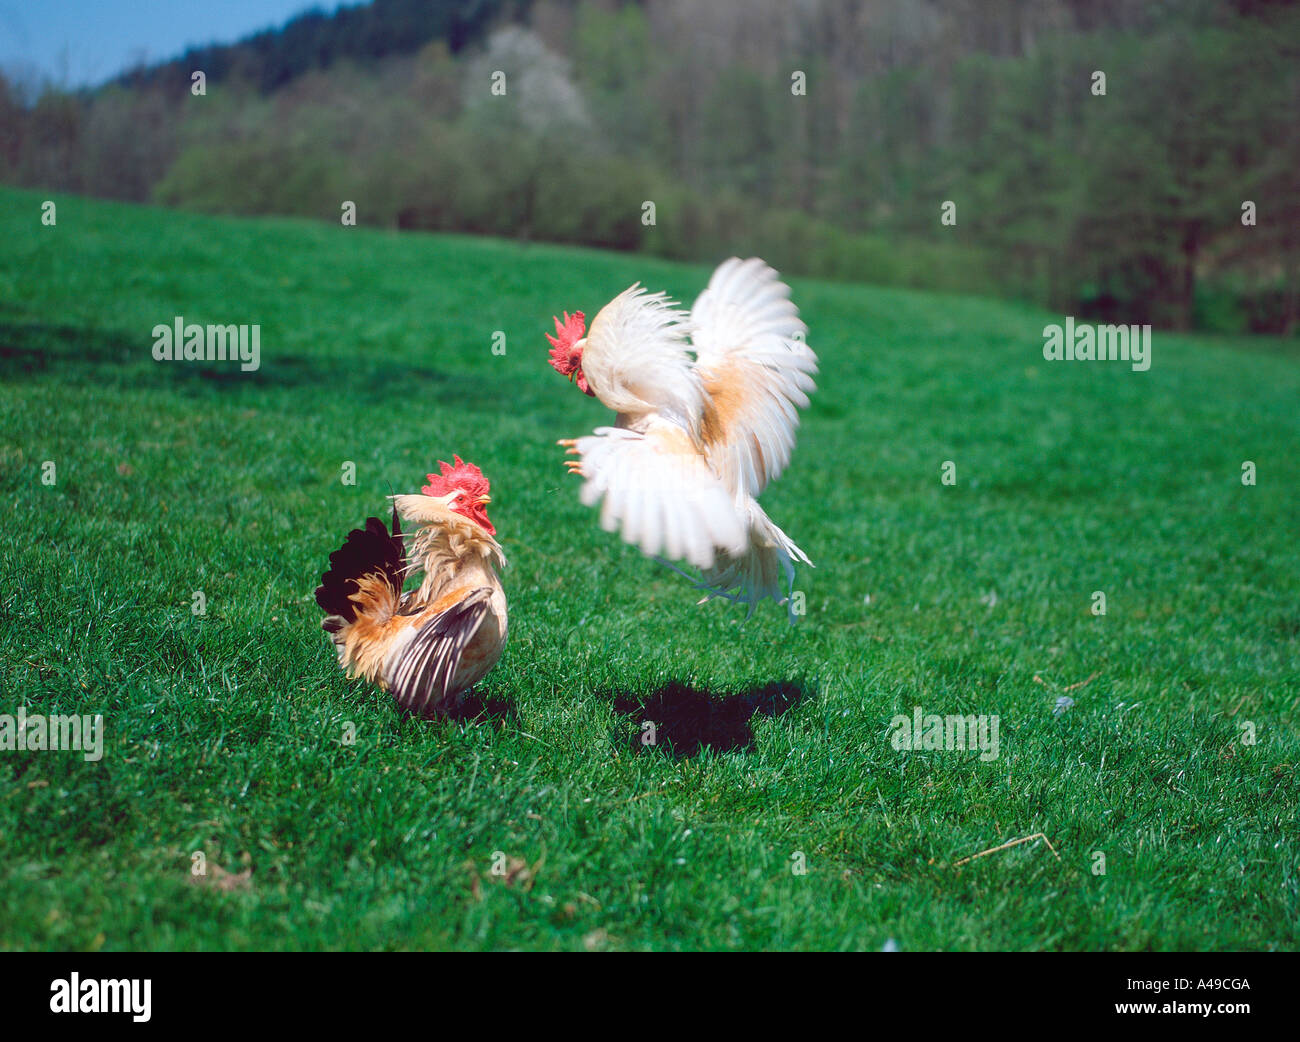 Domestic Fowl / Rooster / Chicken Stock Photo